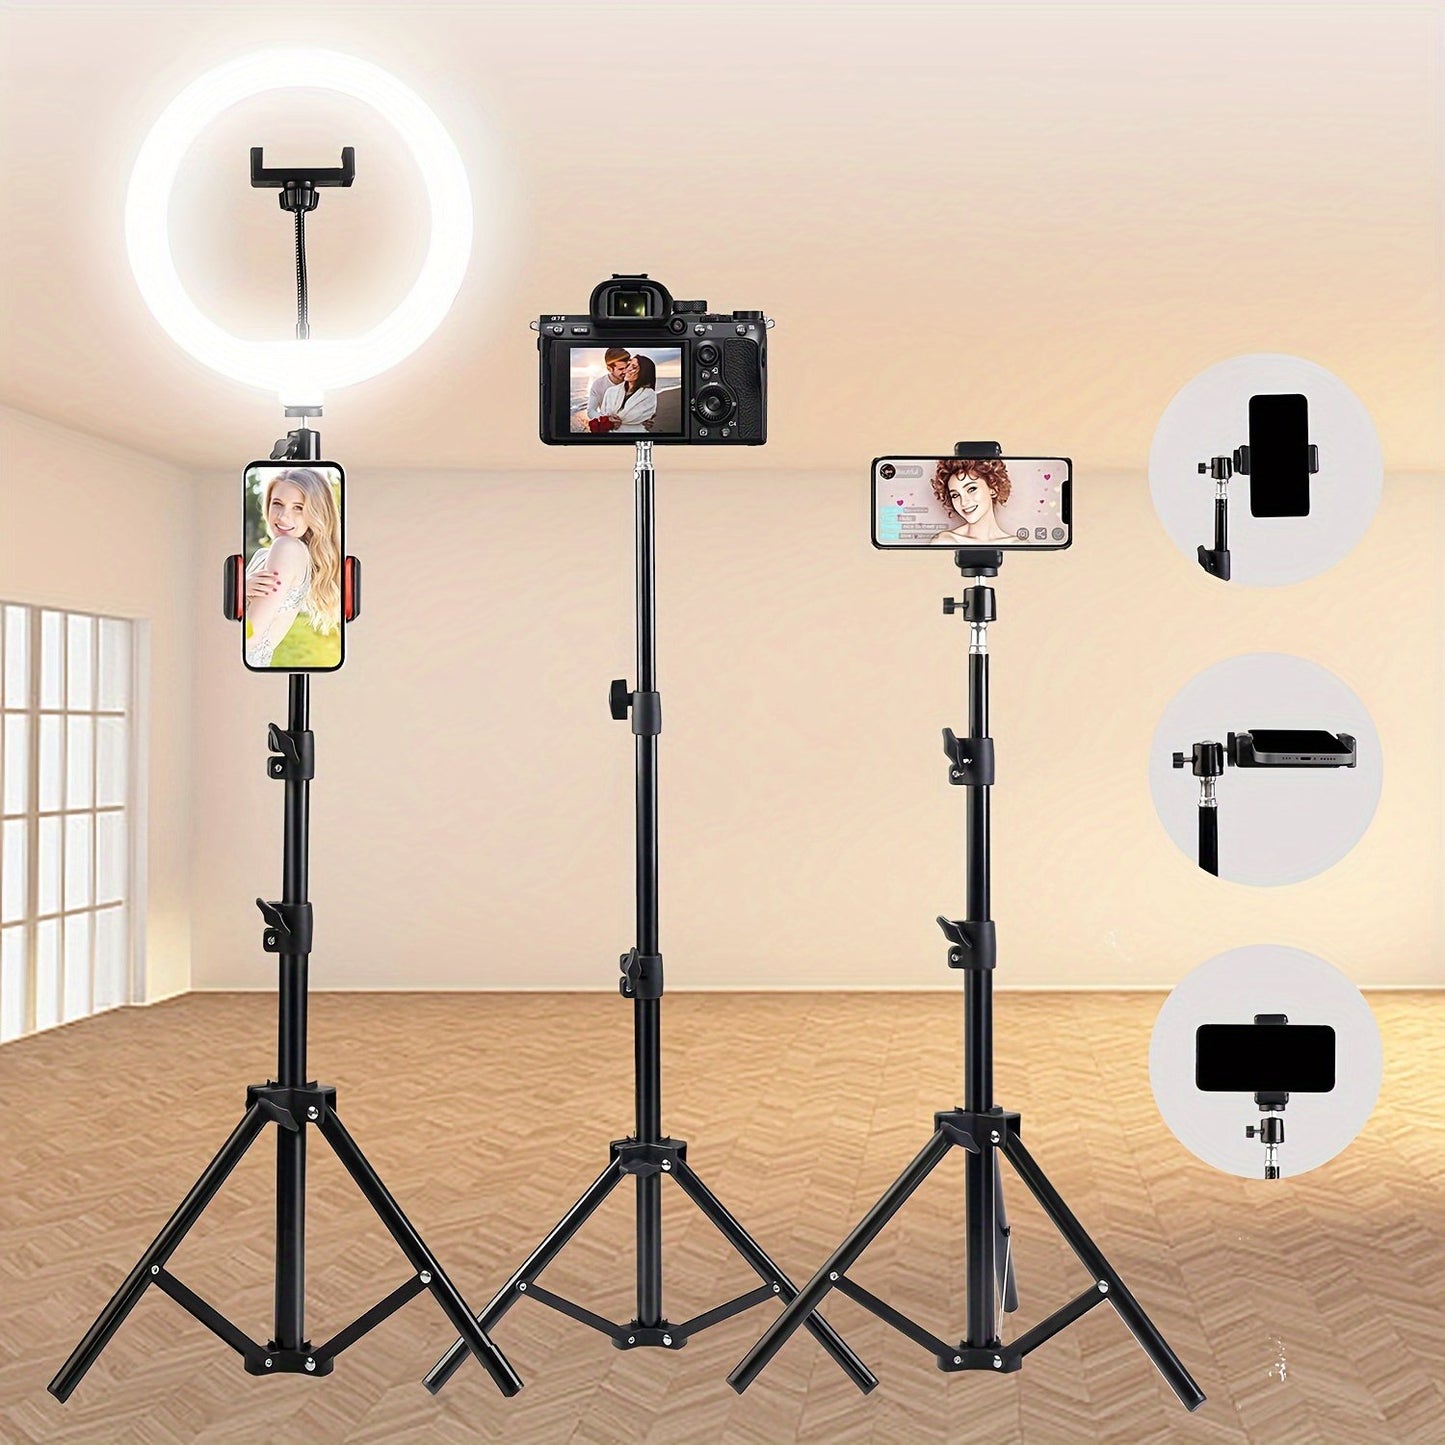 "3 colors Professional 55.5"" Selfie Ring Light Tripod Set with 2 Phone Holders - Perfect for Makeup, Photography, Videos, and Vlogging - 12 Brightness Levels and Multiple Modes for Stunning Results"